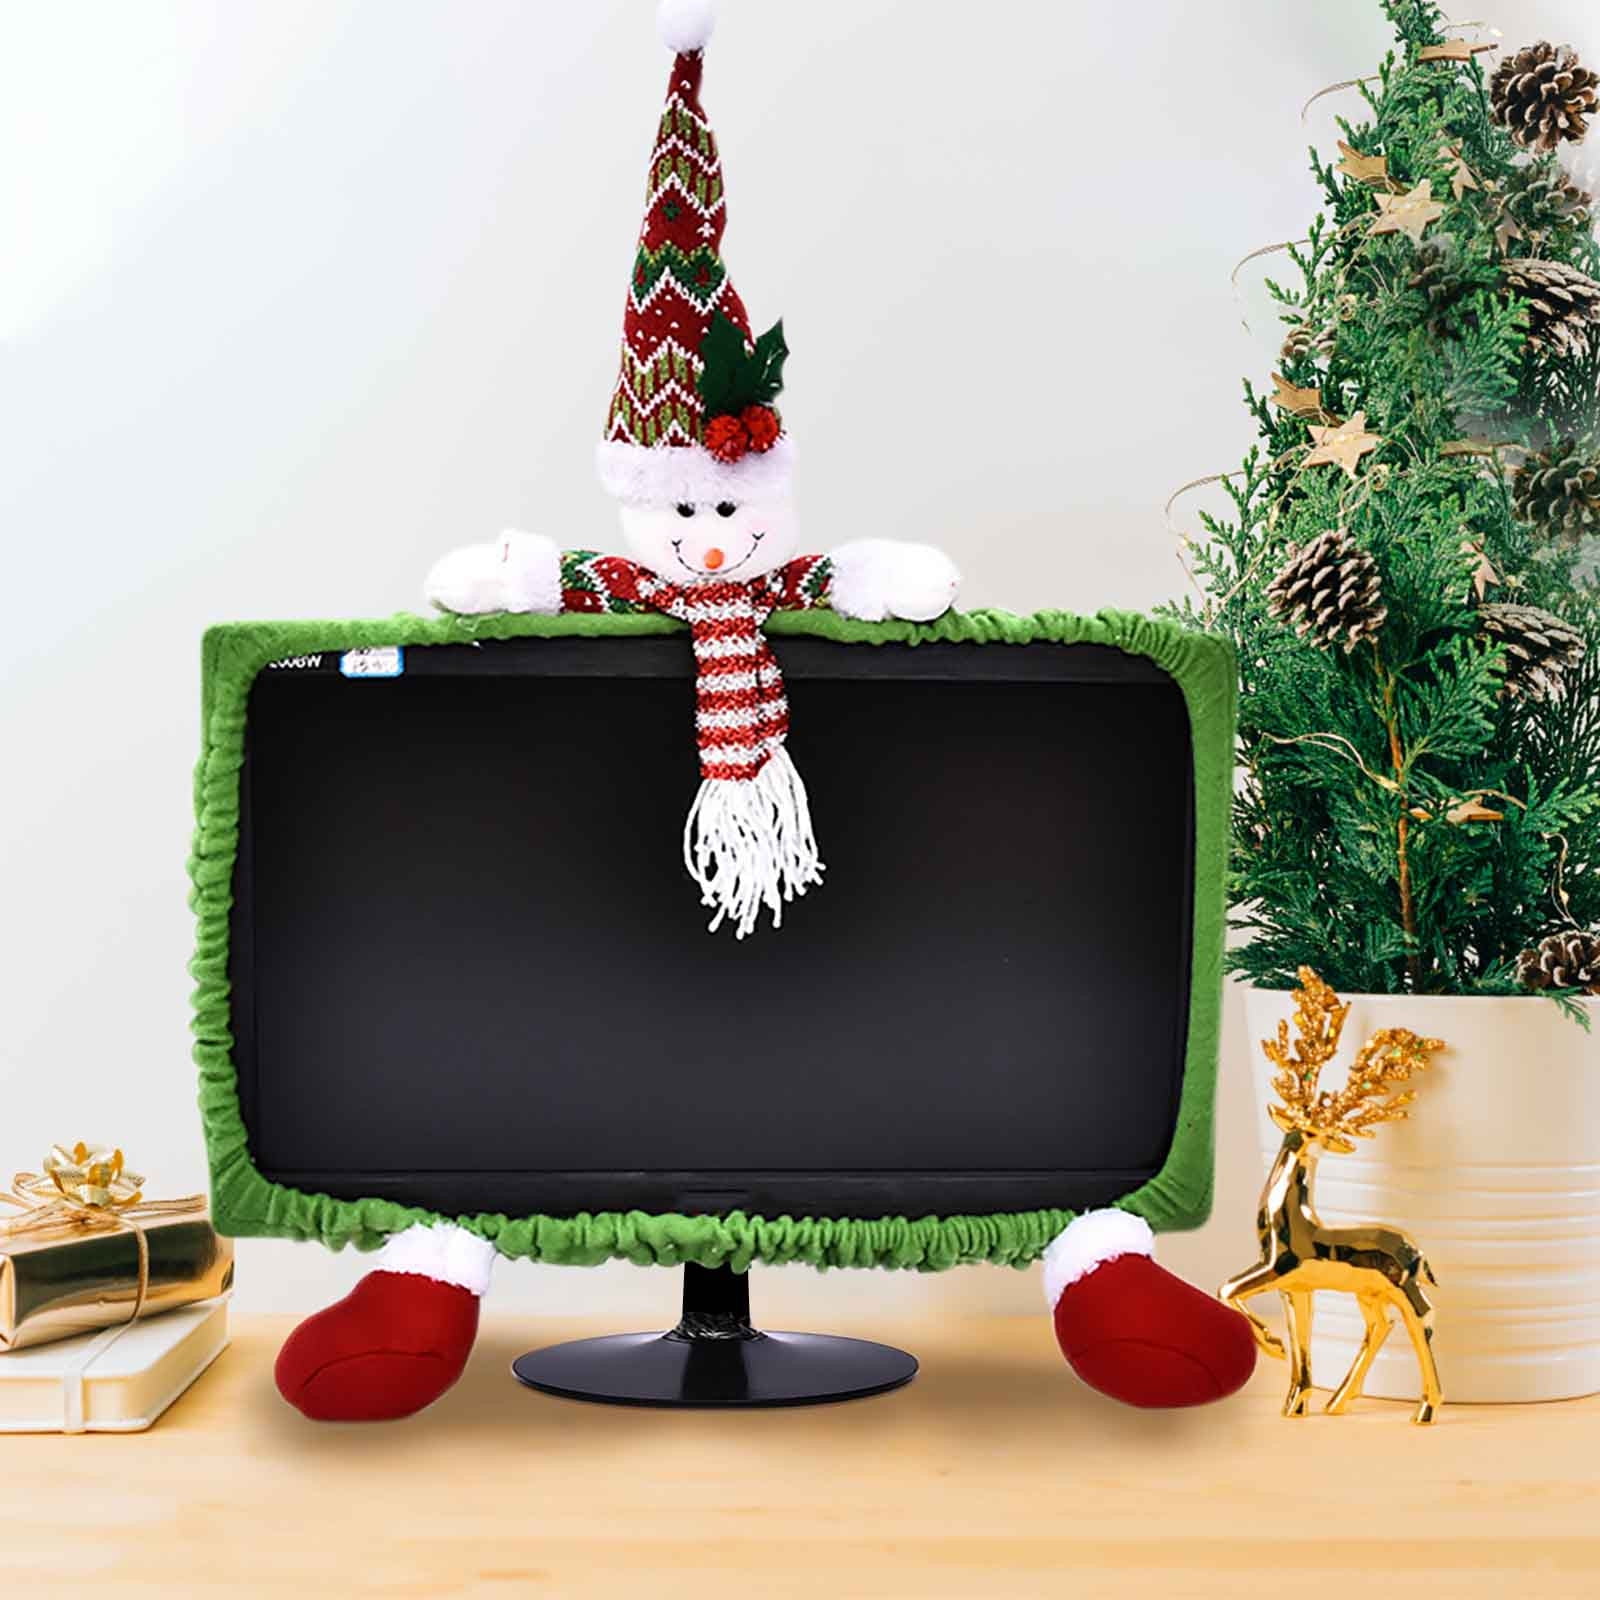 Black and Friday Christmas Trees 1 Pack Christmas Computer Monitor Border Cover TV Monitor Cover Elastic Laptop Computer Cover for Xmas Home Office